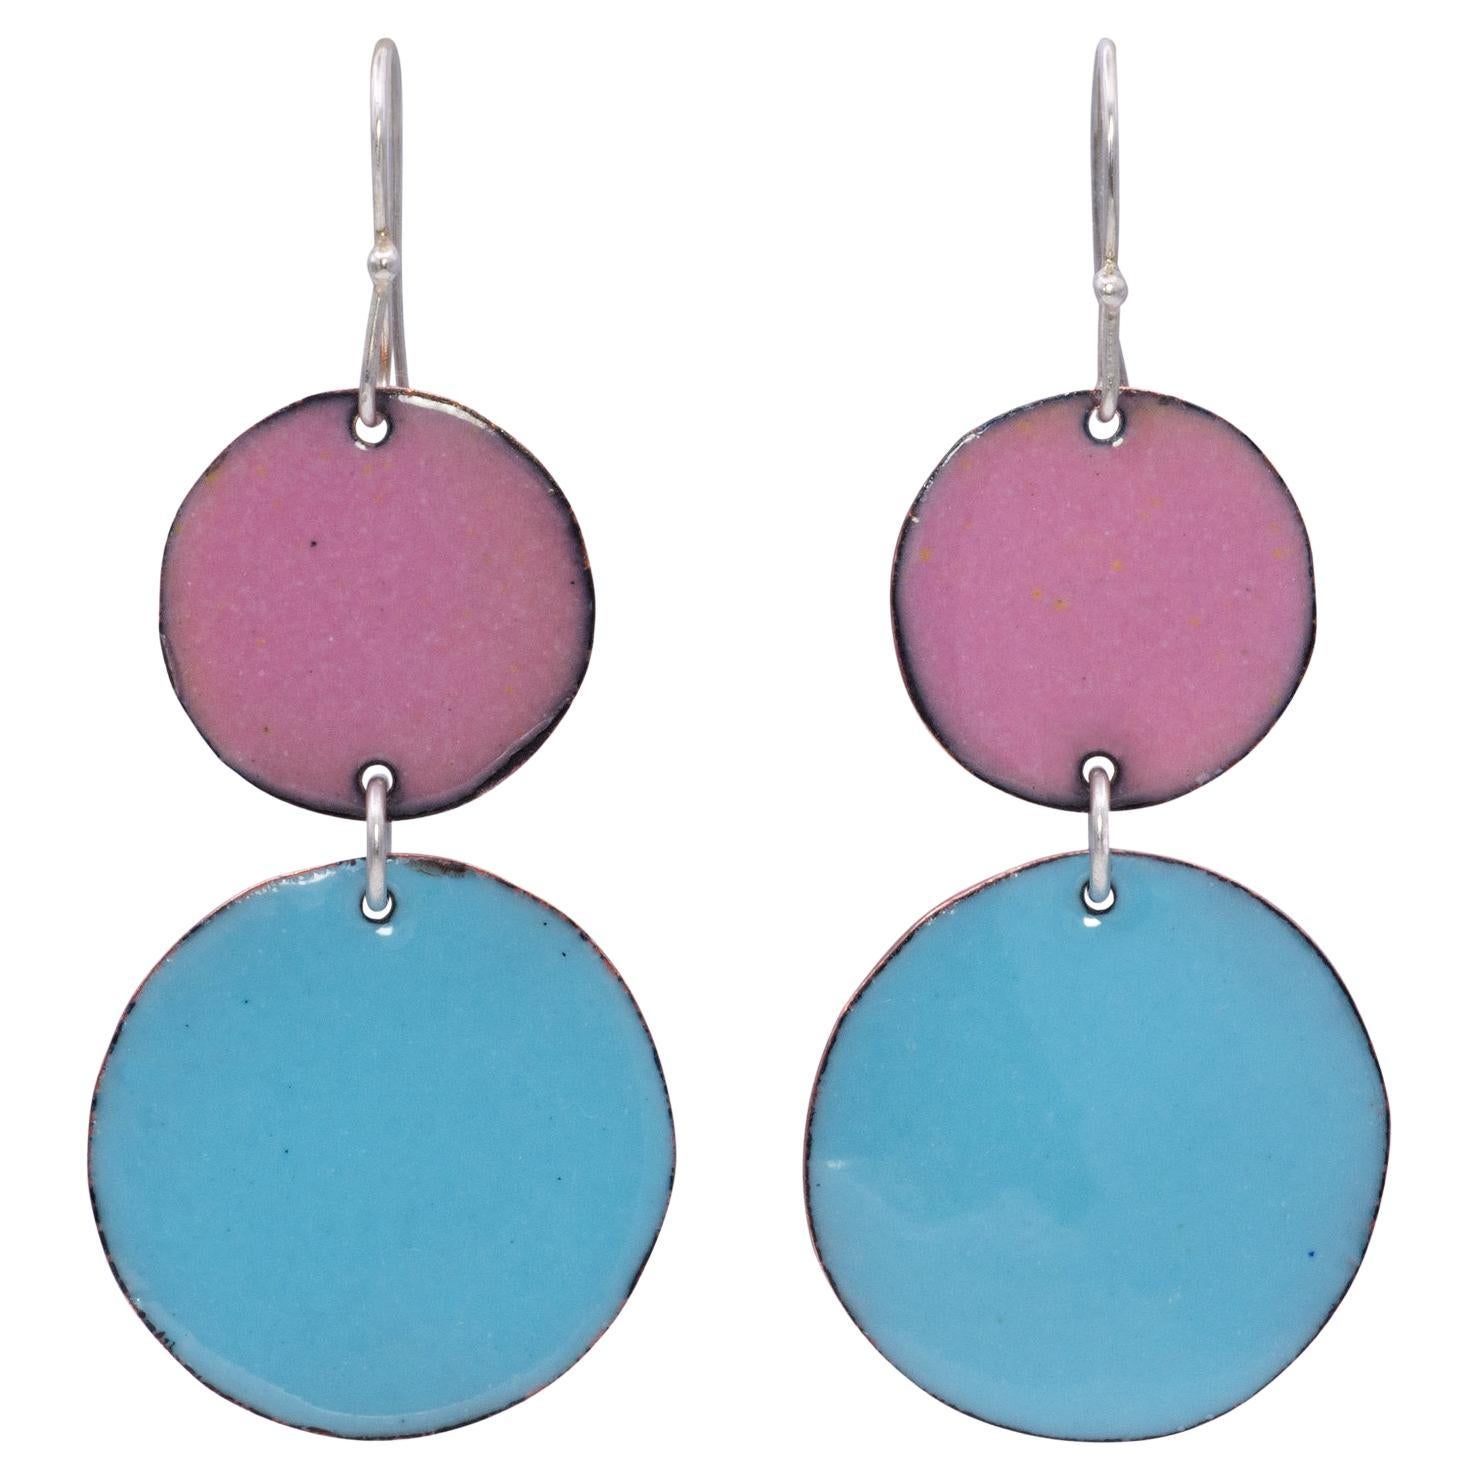 Bright Blue and Pink Hand Painted Copper Enamel Discs with Sterling Silver